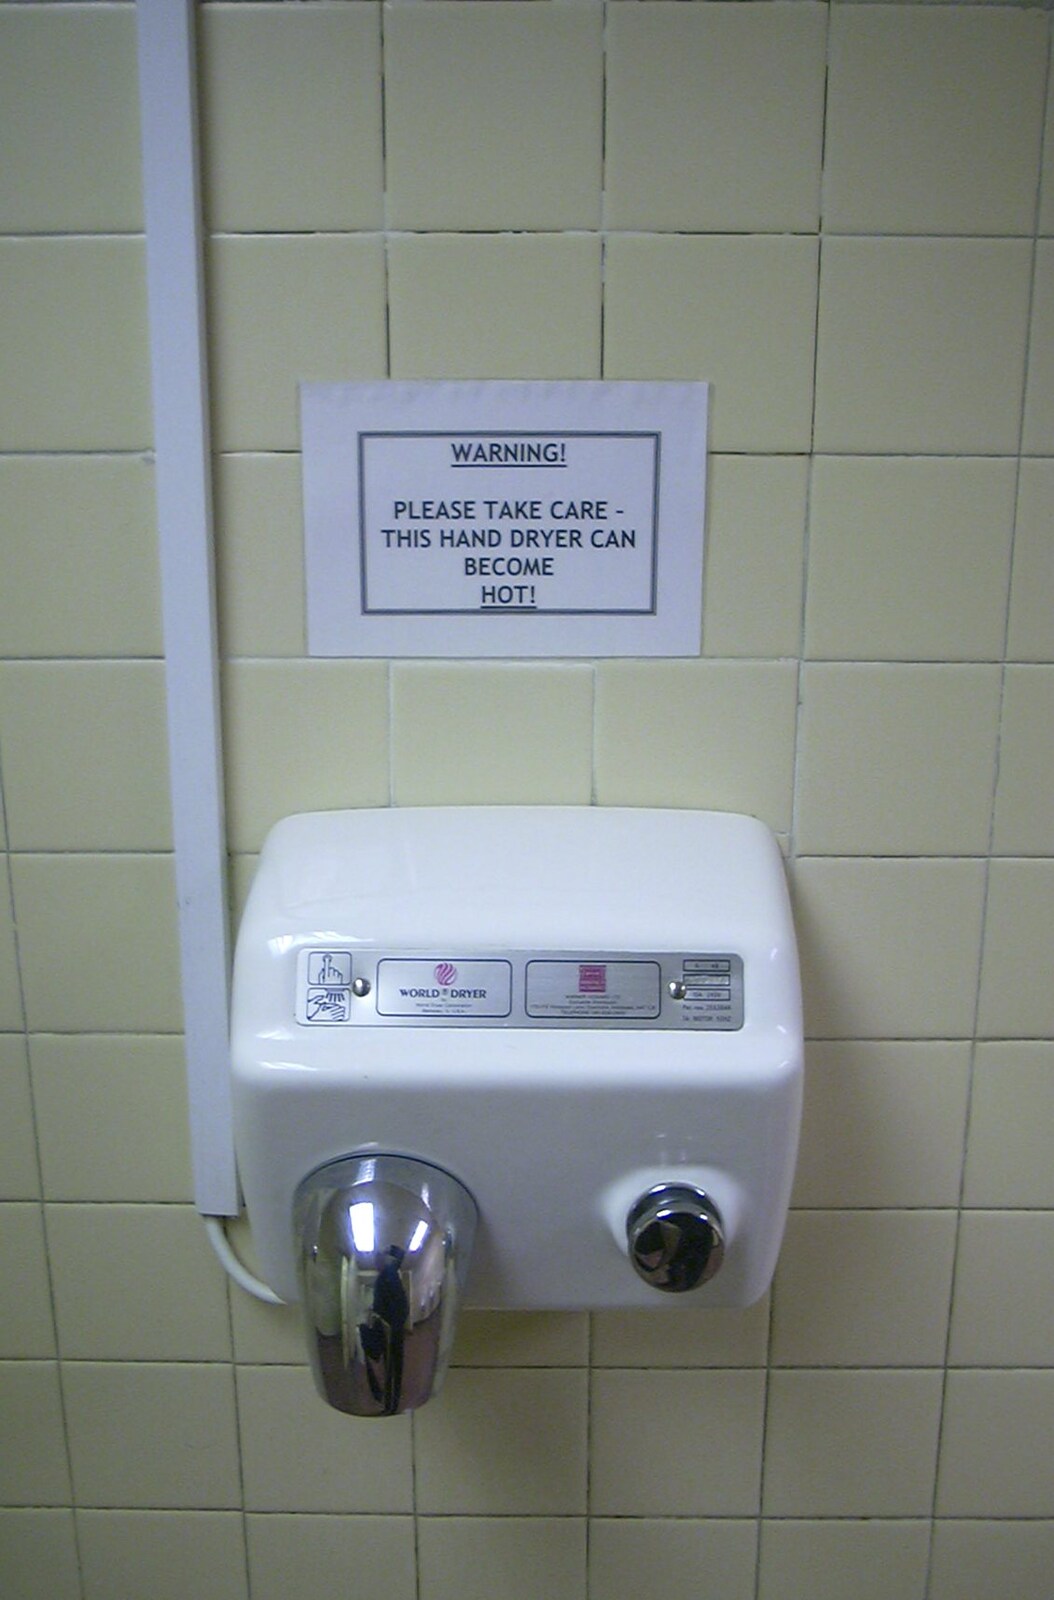 There's a dangerous hand dryer which runs hot from The BBs at BOCM Pauls Pavillion, Burston, Norfolk - 20th May 2003